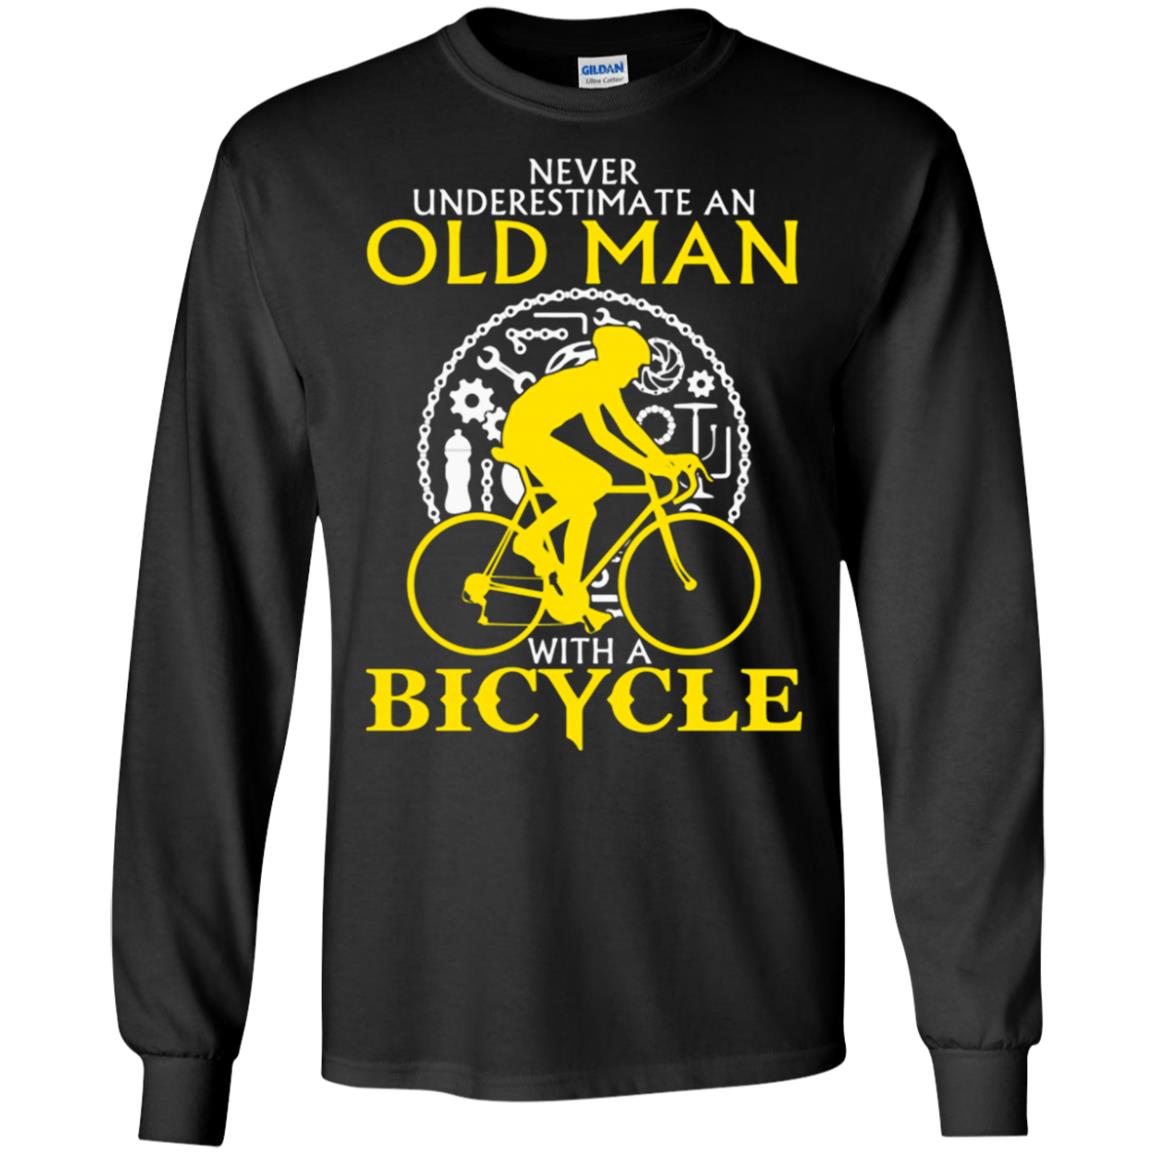 Never Underestimate An Old Man With A Bicycle Ts Shirts